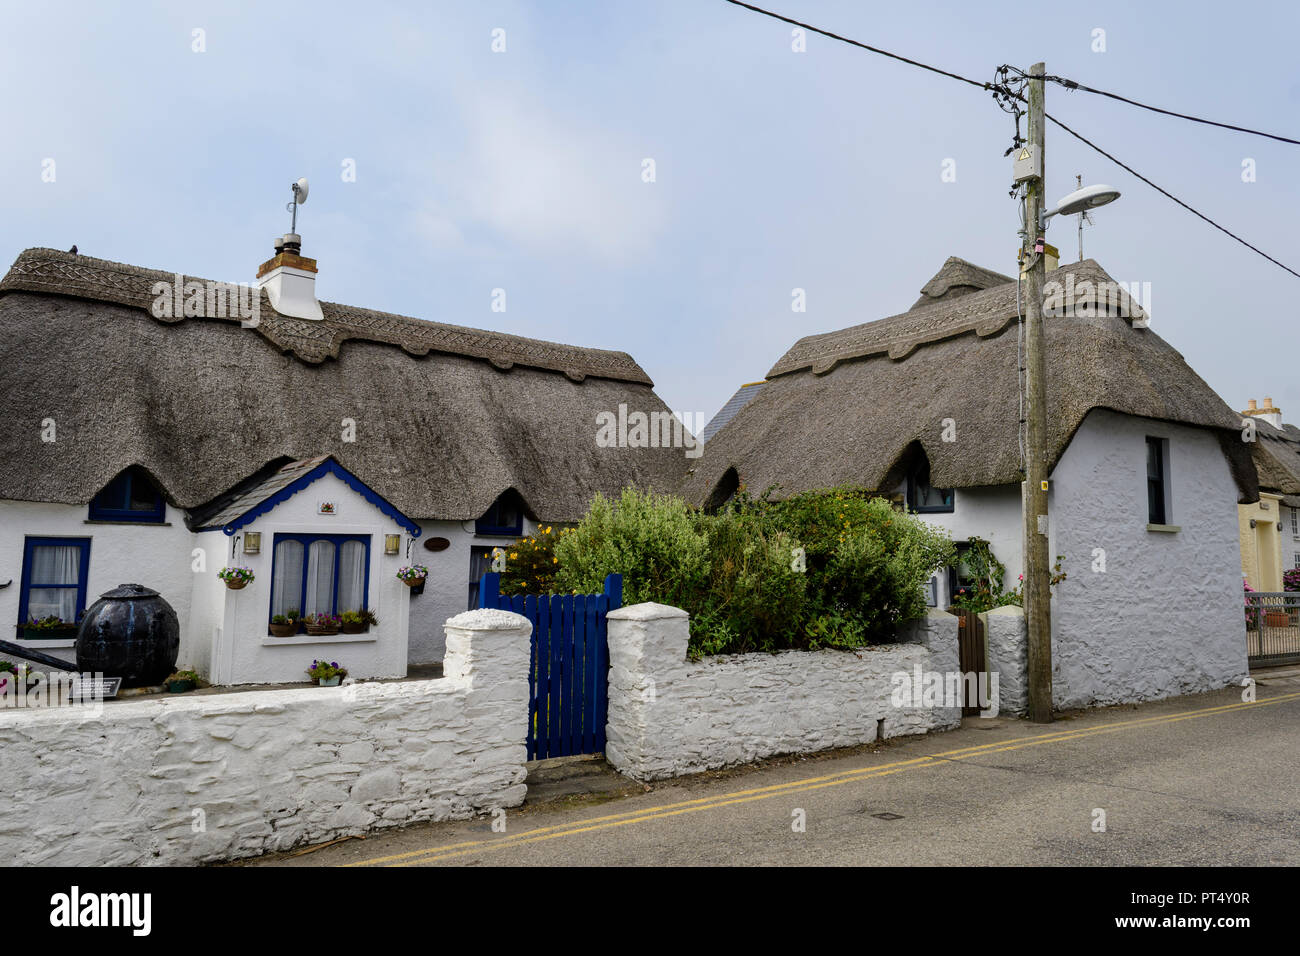 Reetgedeckte Cottages in Kilmore Quay, Co Wexford, Irland Stockfoto